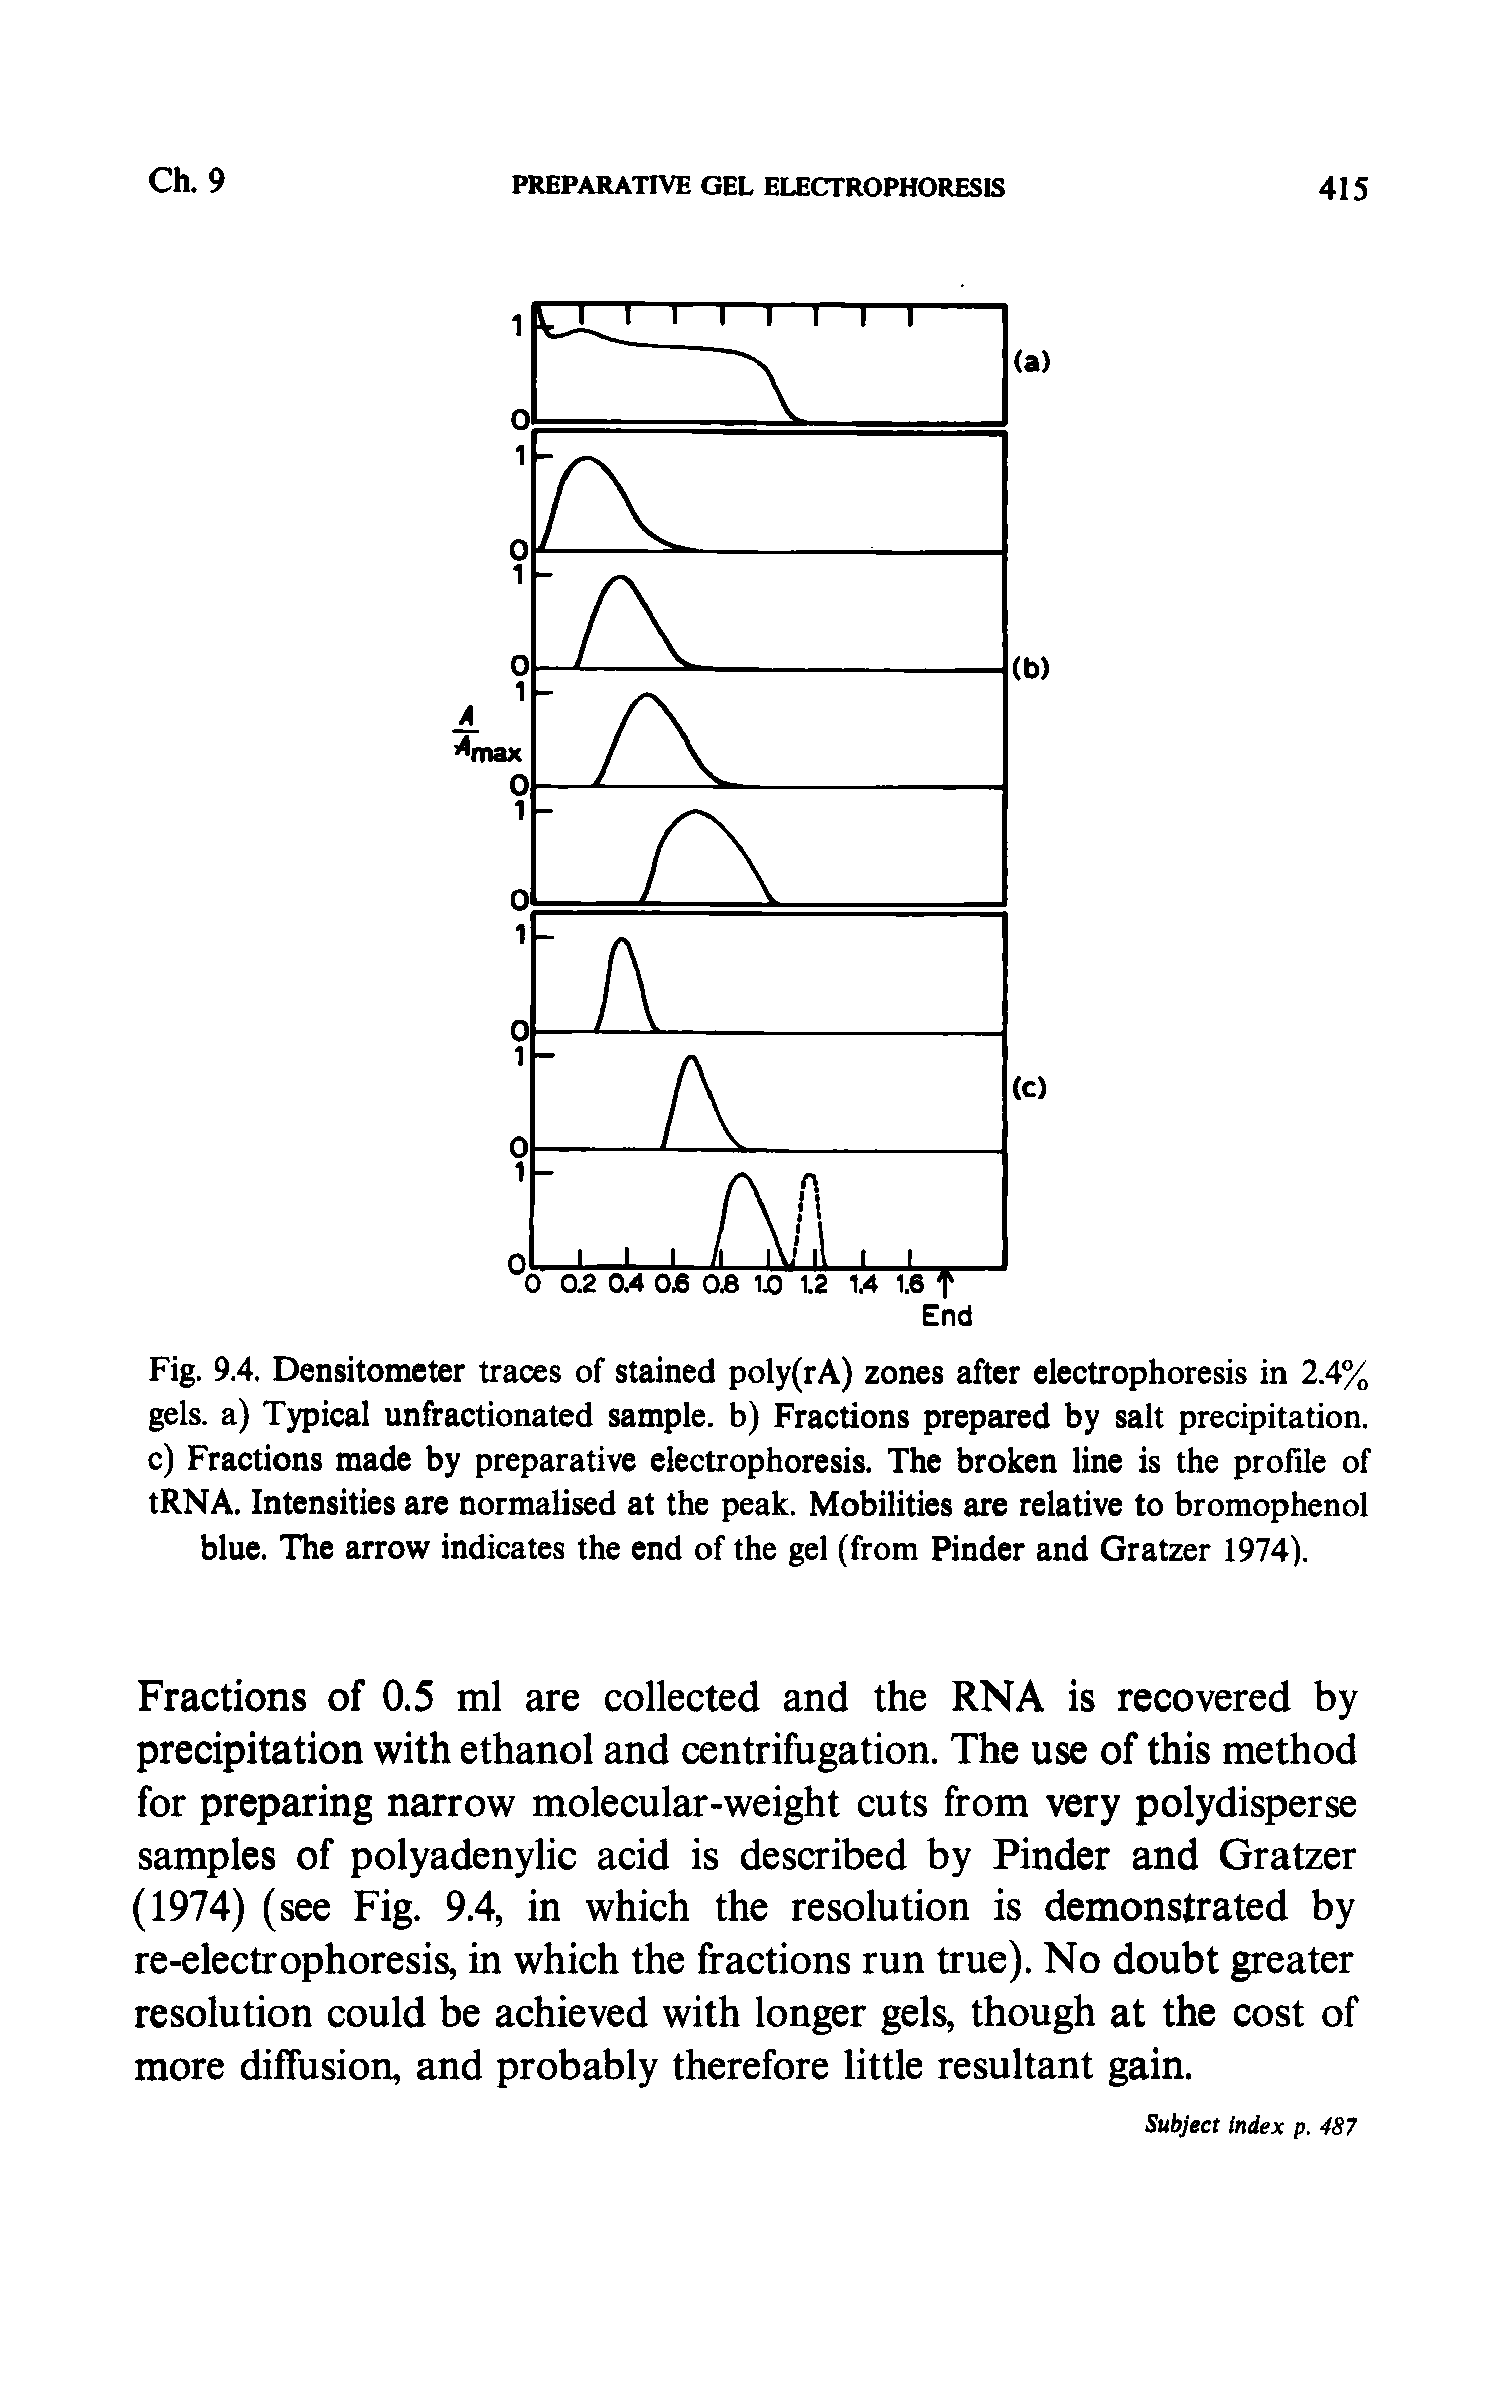 Fig. 9.4. Densitometer traces of stained poly(rA) zones after electrophoresis in 2.4% gels, a) Typical unfractionated sample, b) Fractions prepared by salt precipitation, c) Fractions made by preparative electrophoresis. The broken line is the profile of tRNA. Intensities are normalised at the peak. Mobilities are relative to bromophenol blue. The arrow indicates the end of the gel (from Finder and Gratzer 1974).